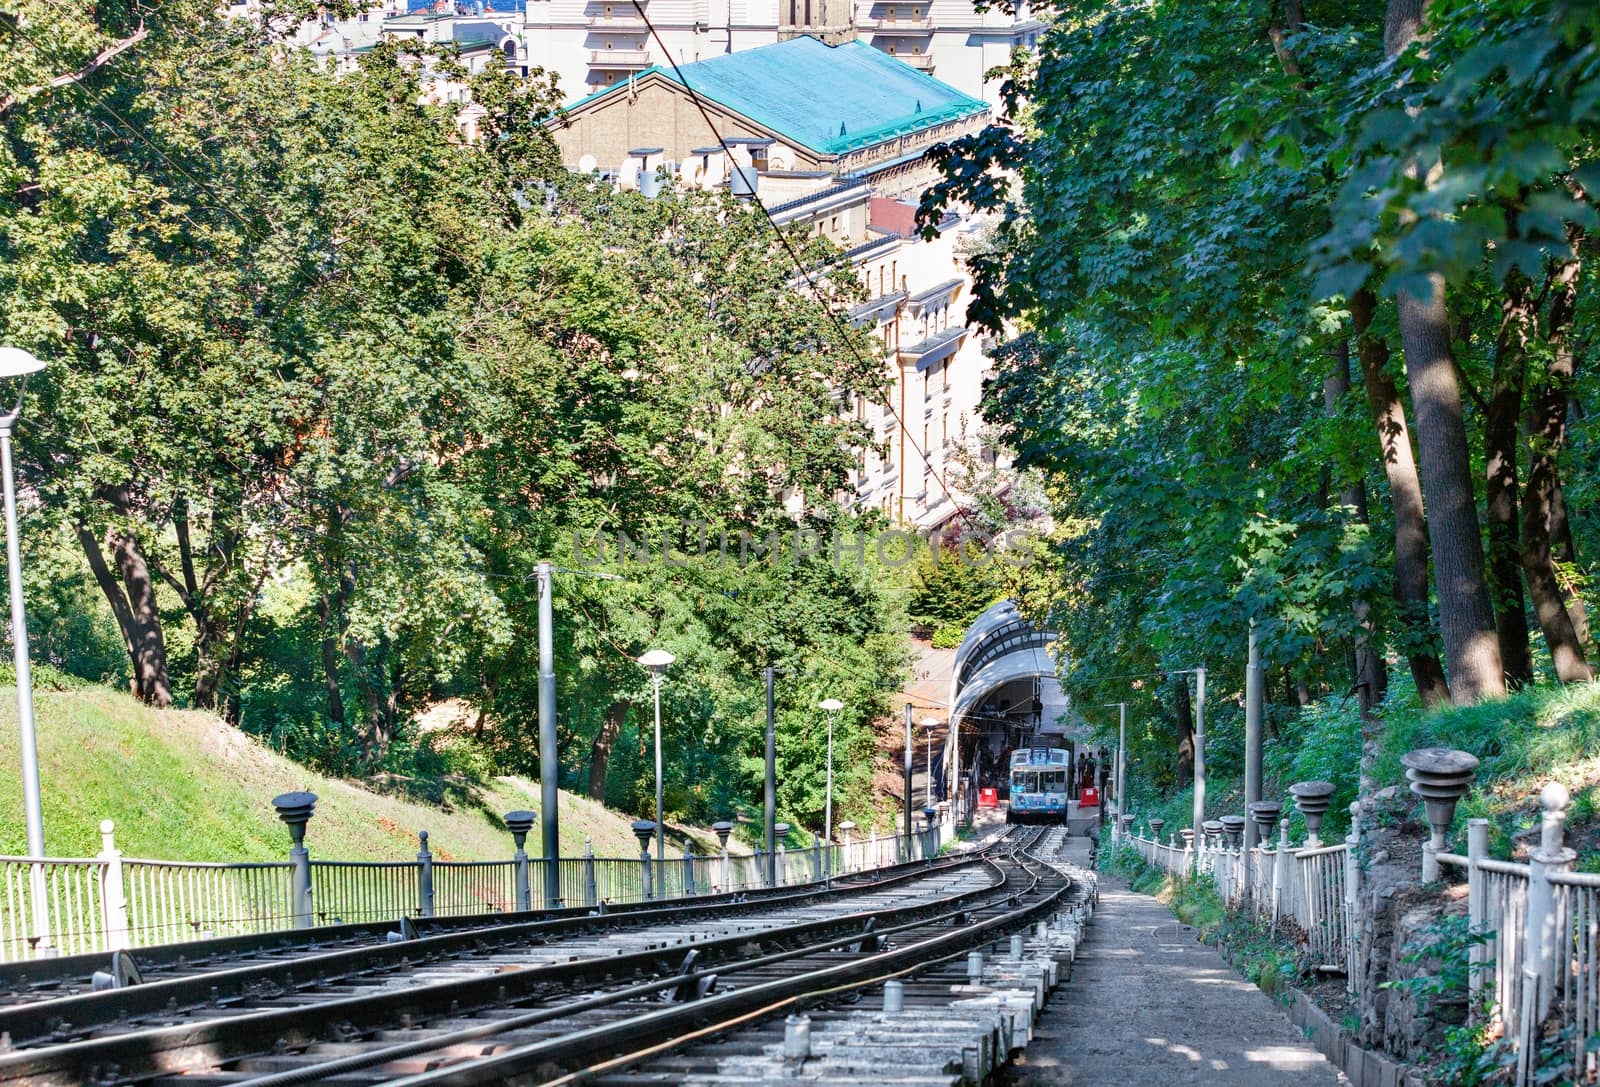 A cable funicular, surrounded by the green foliage of a summer park, picks up passengers at the bottom station to lift them up the mountainside.